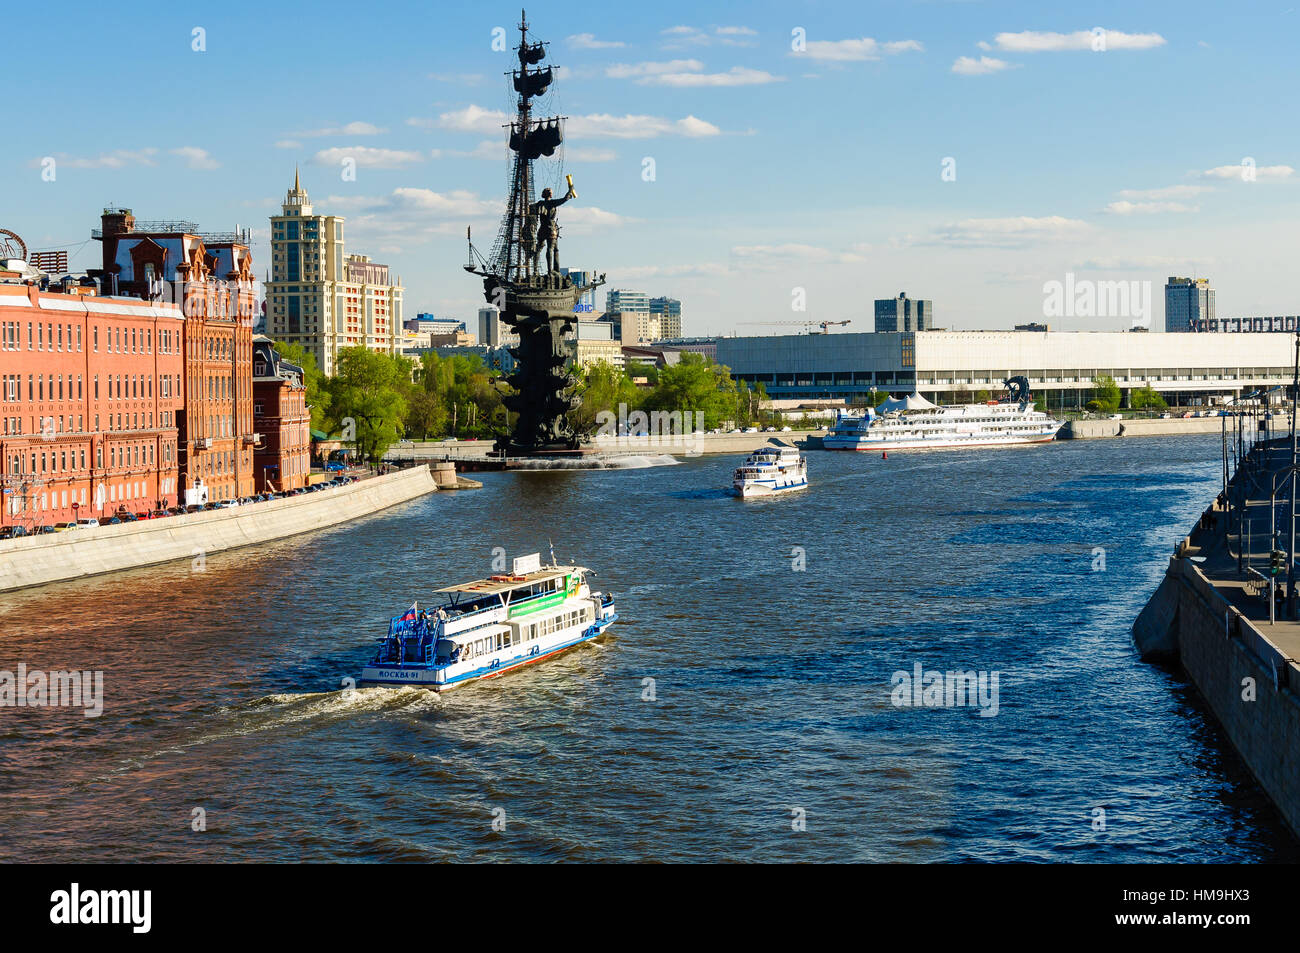 This is a river in Moscow,Russia. It's a nice sunrise and beautiful weather. Stock Photo